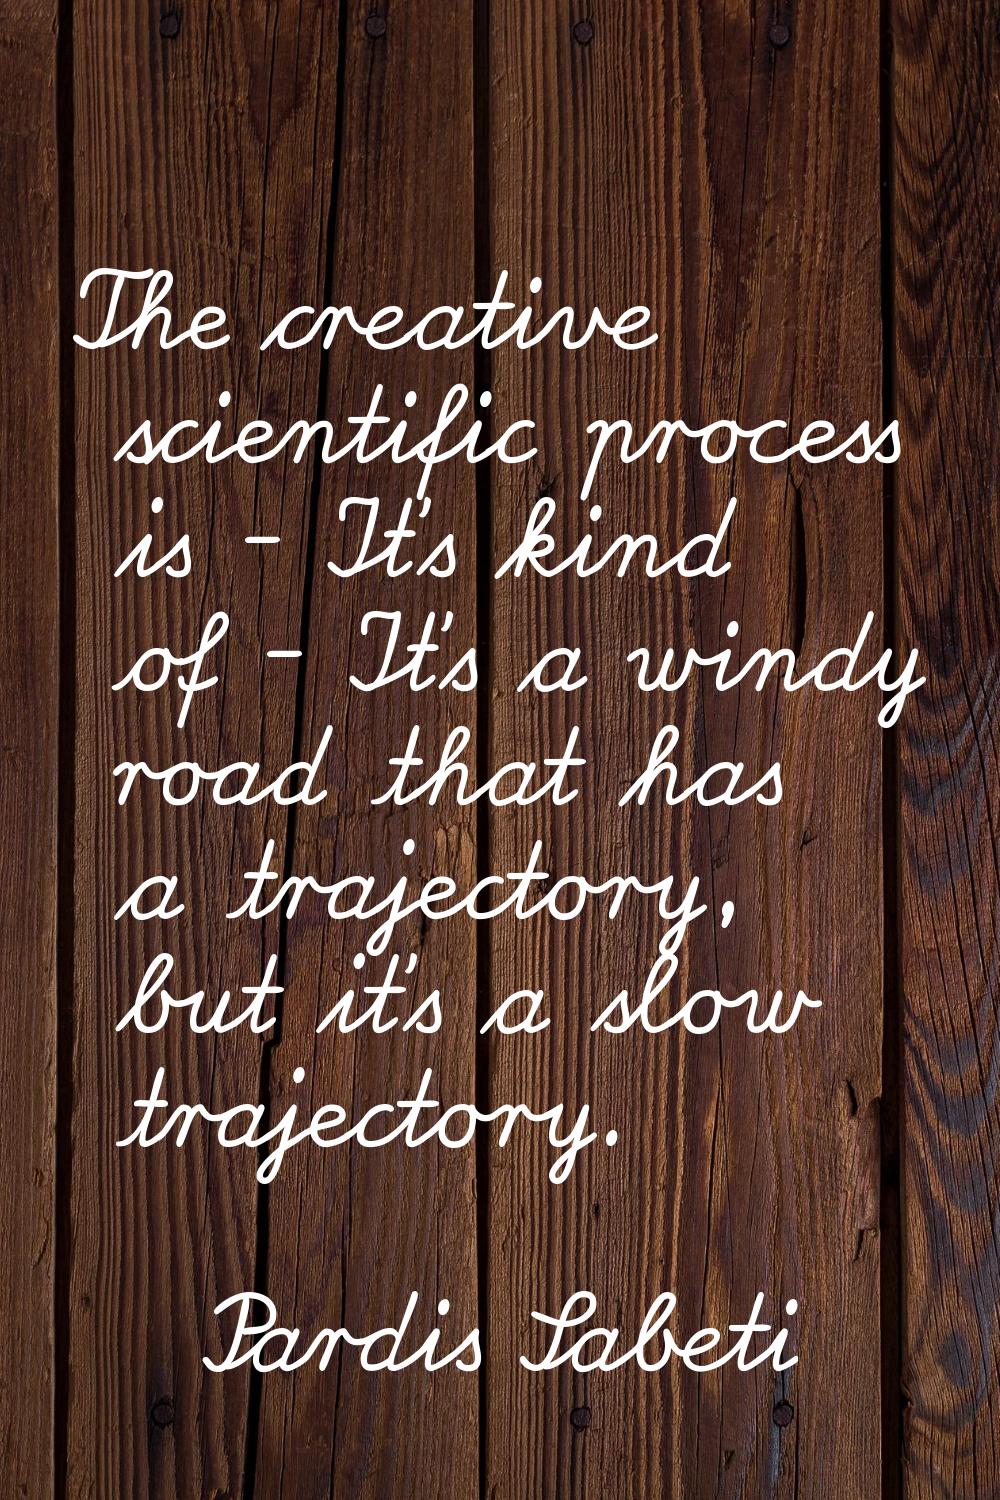 The creative scientific process is - It's kind of - It's a windy road that has a trajectory, but it